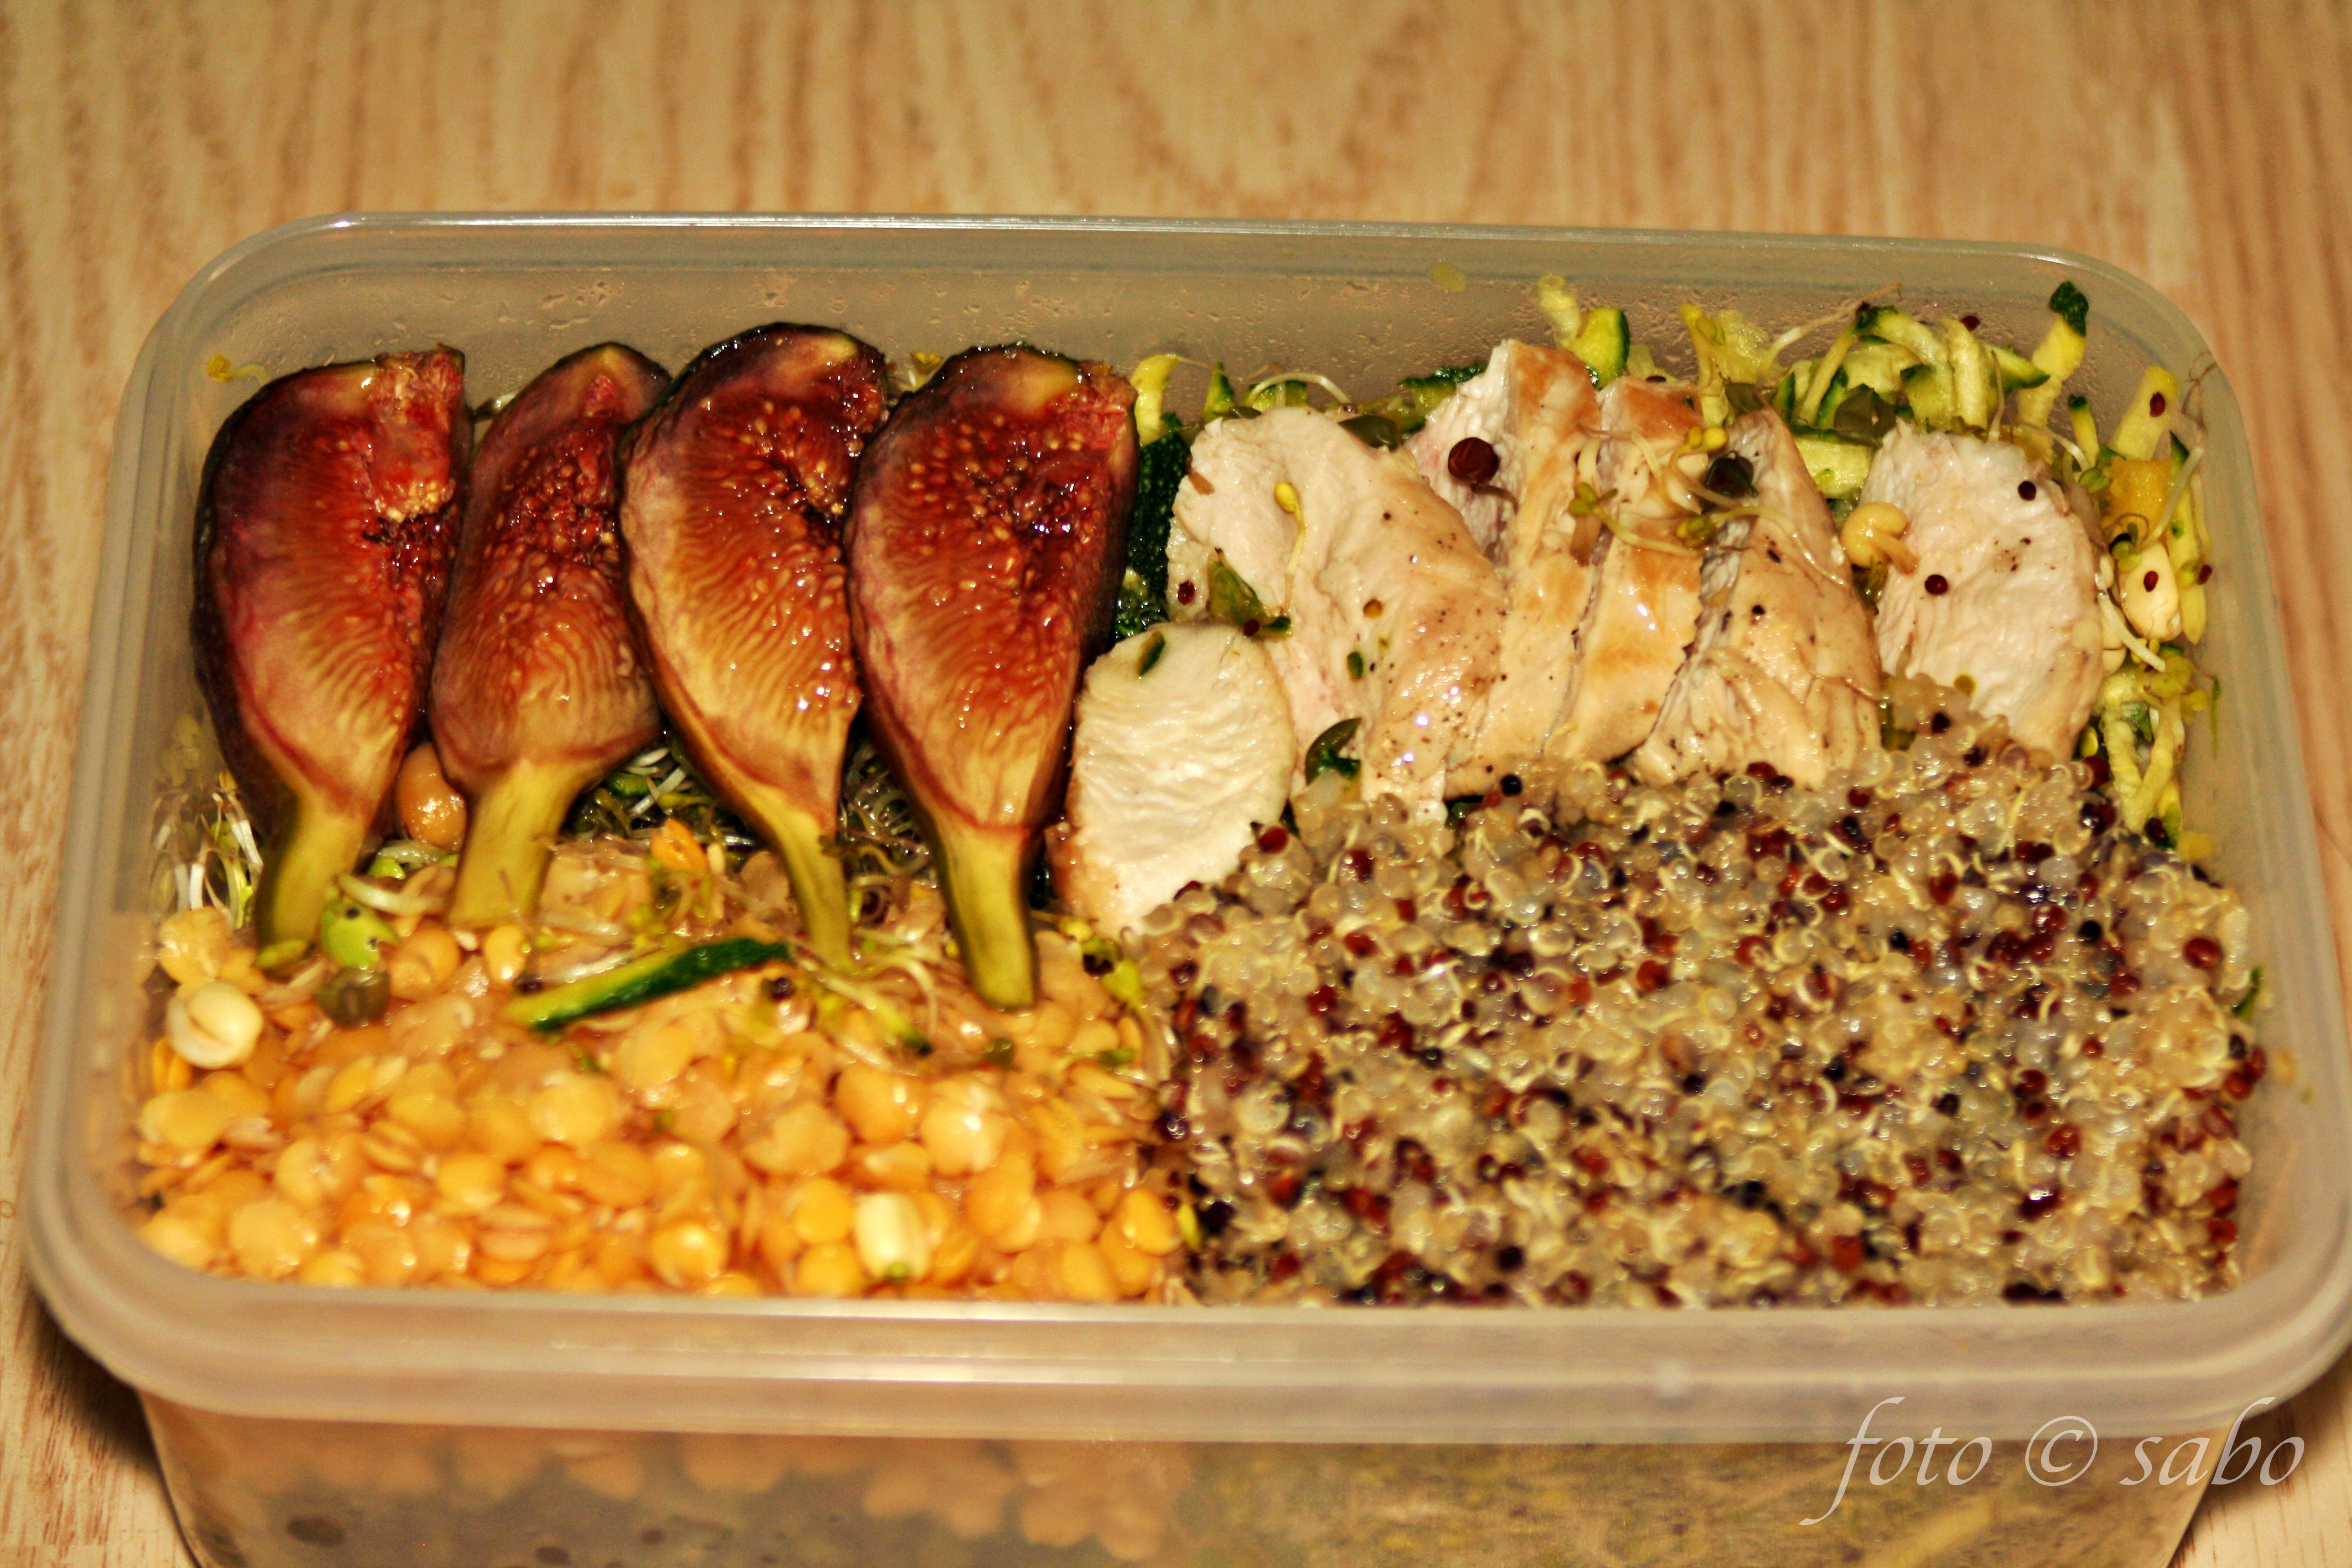 Proteinreiche Lunches / Salate als Meal Prep